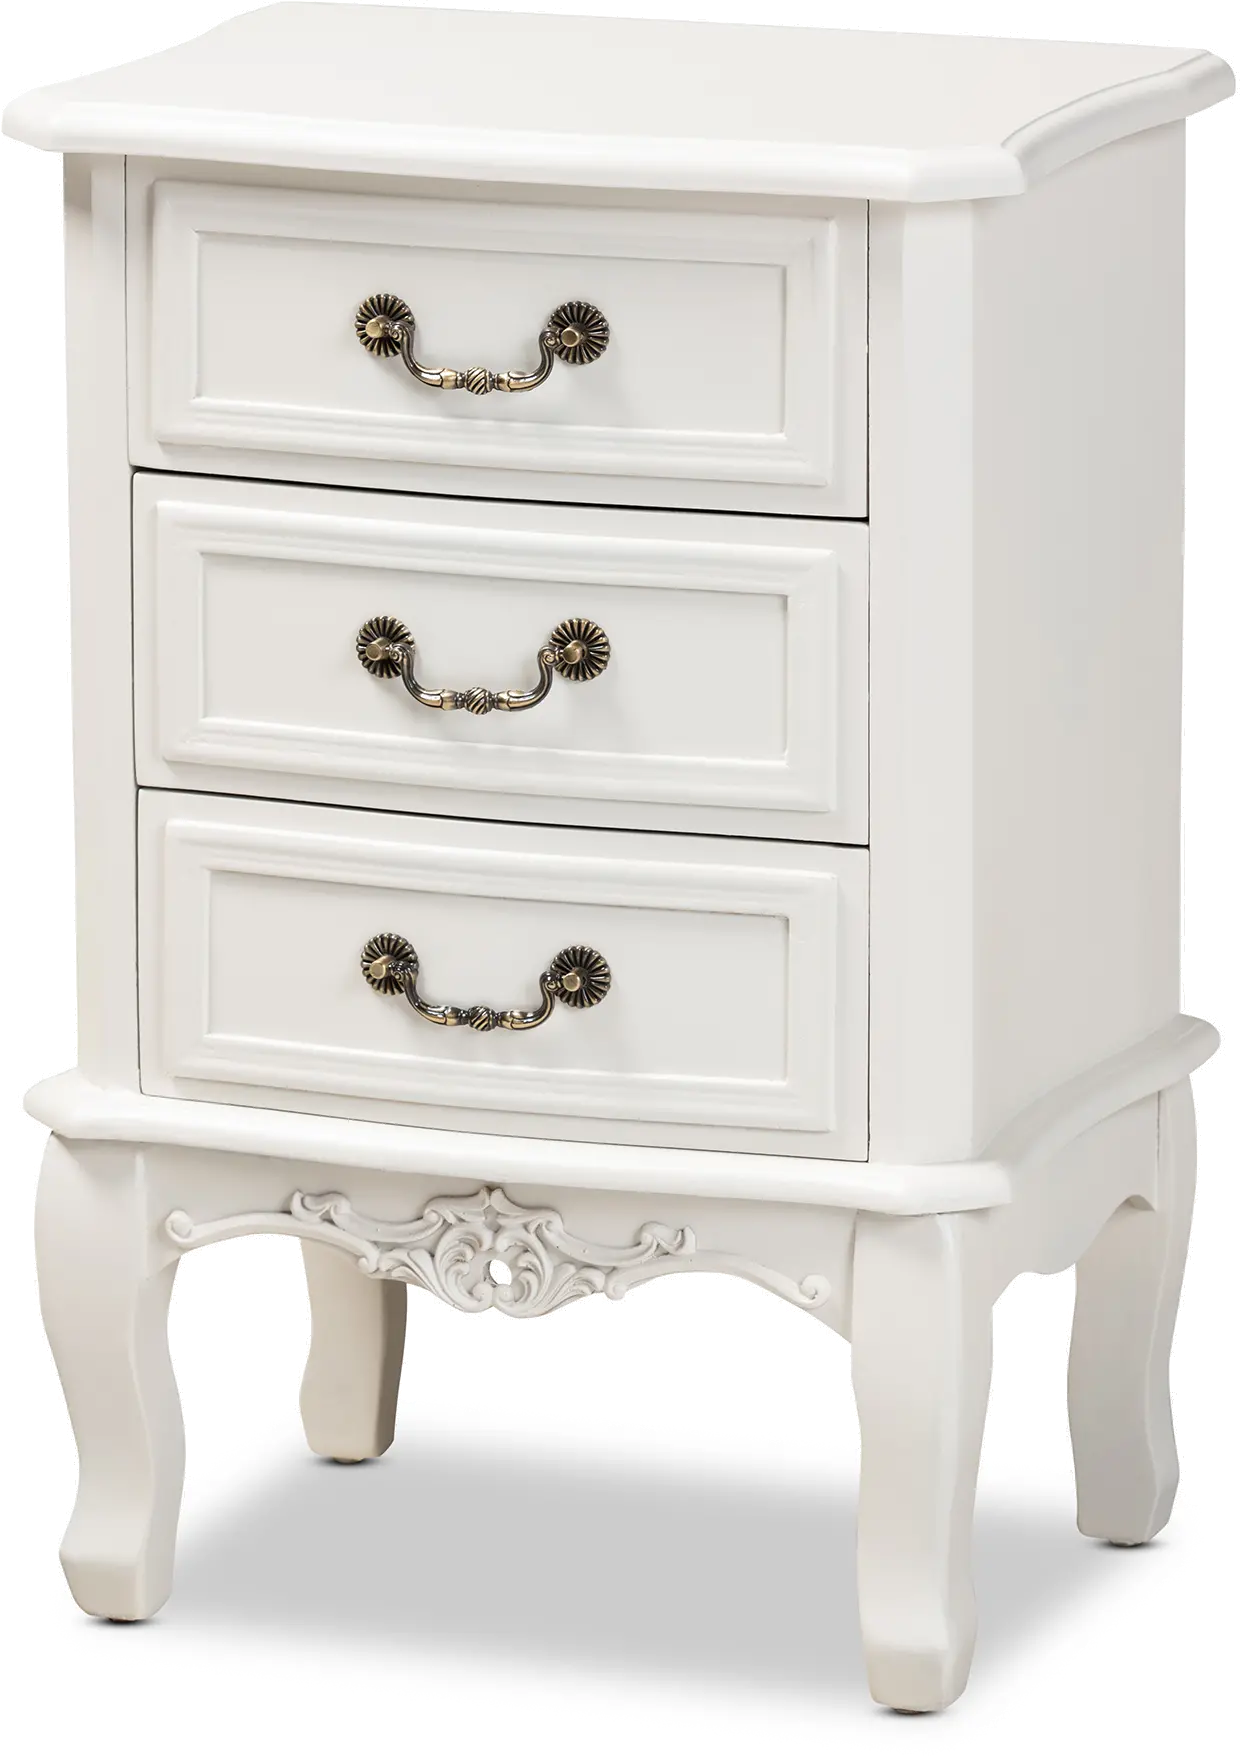 162-10259-RCW French Country White 3-Drawer Nightstand - Bess sku 162-10259-RCW